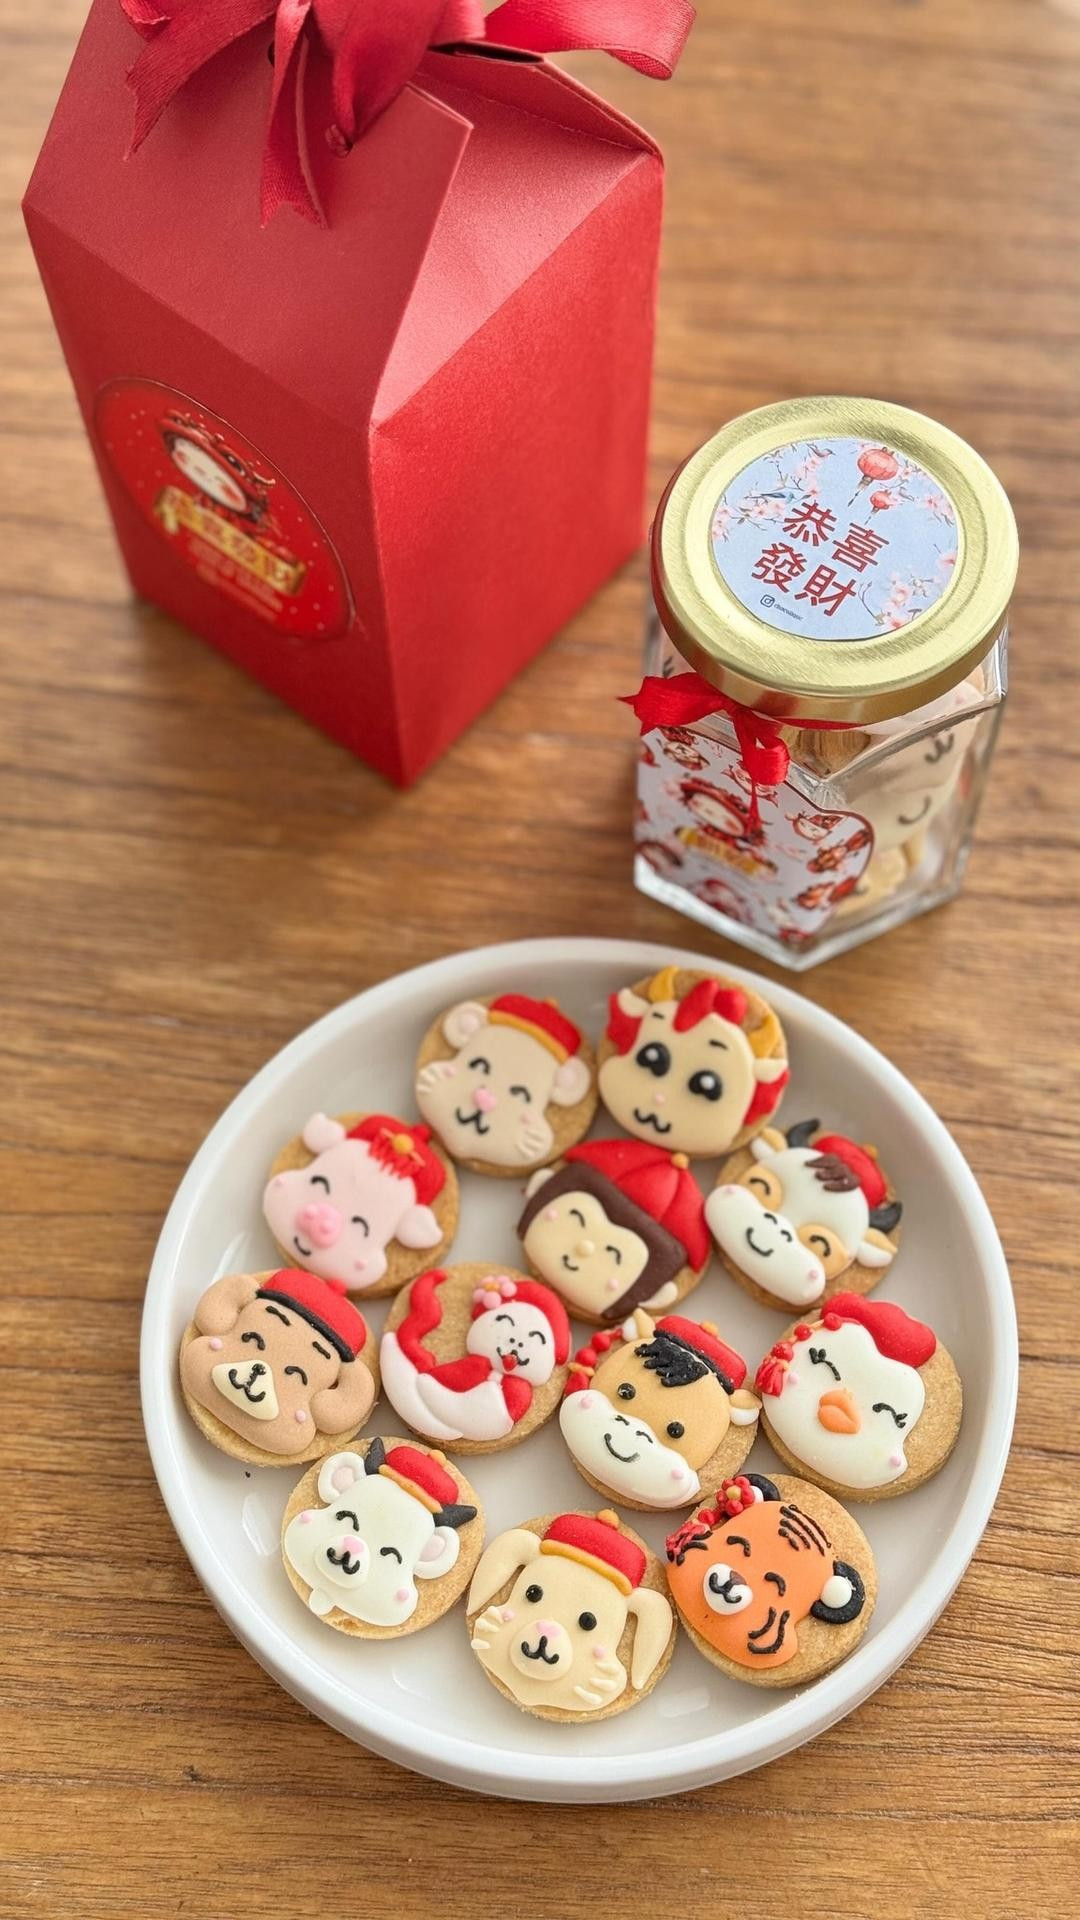 CNY Chinese Zodiac Cookies in Jar